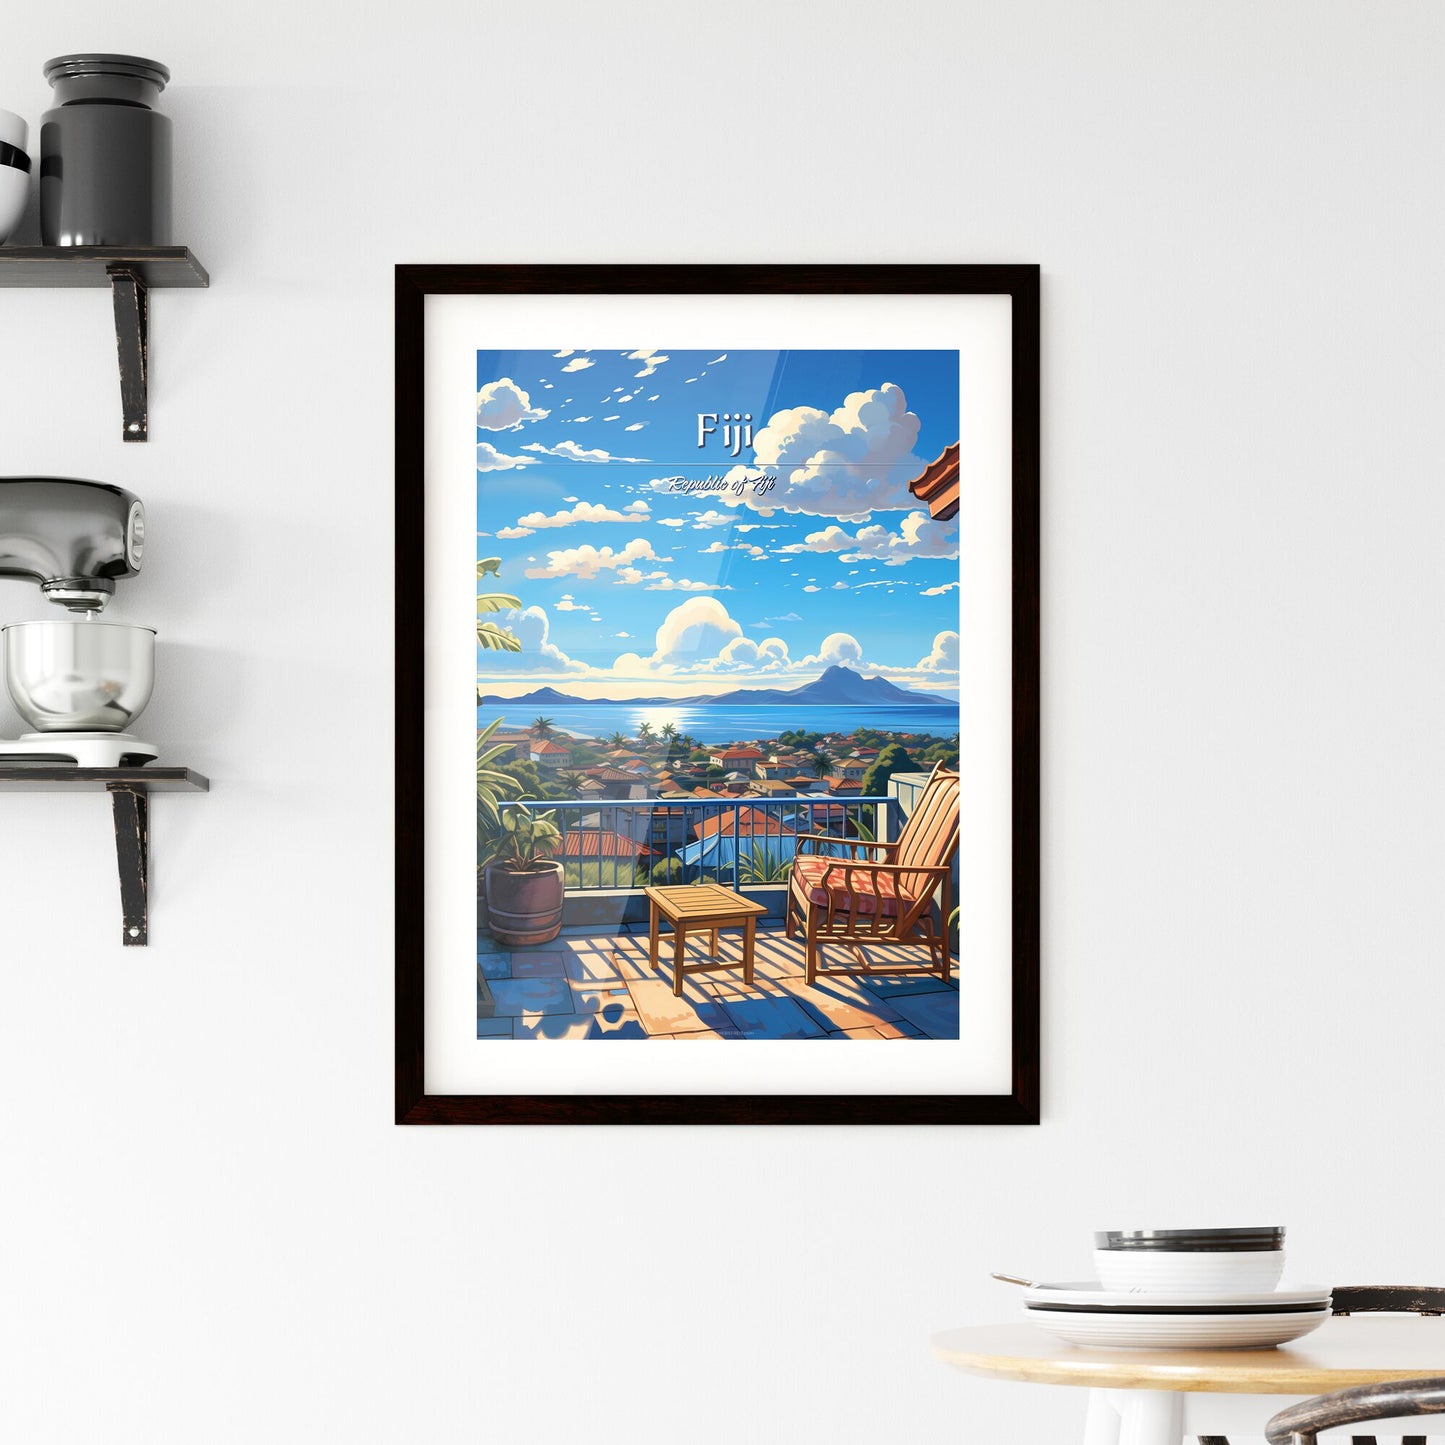 On the roofs of Fiji, Republic of Fiji - Art print of a balcony with a view of a city and mountains Default Title